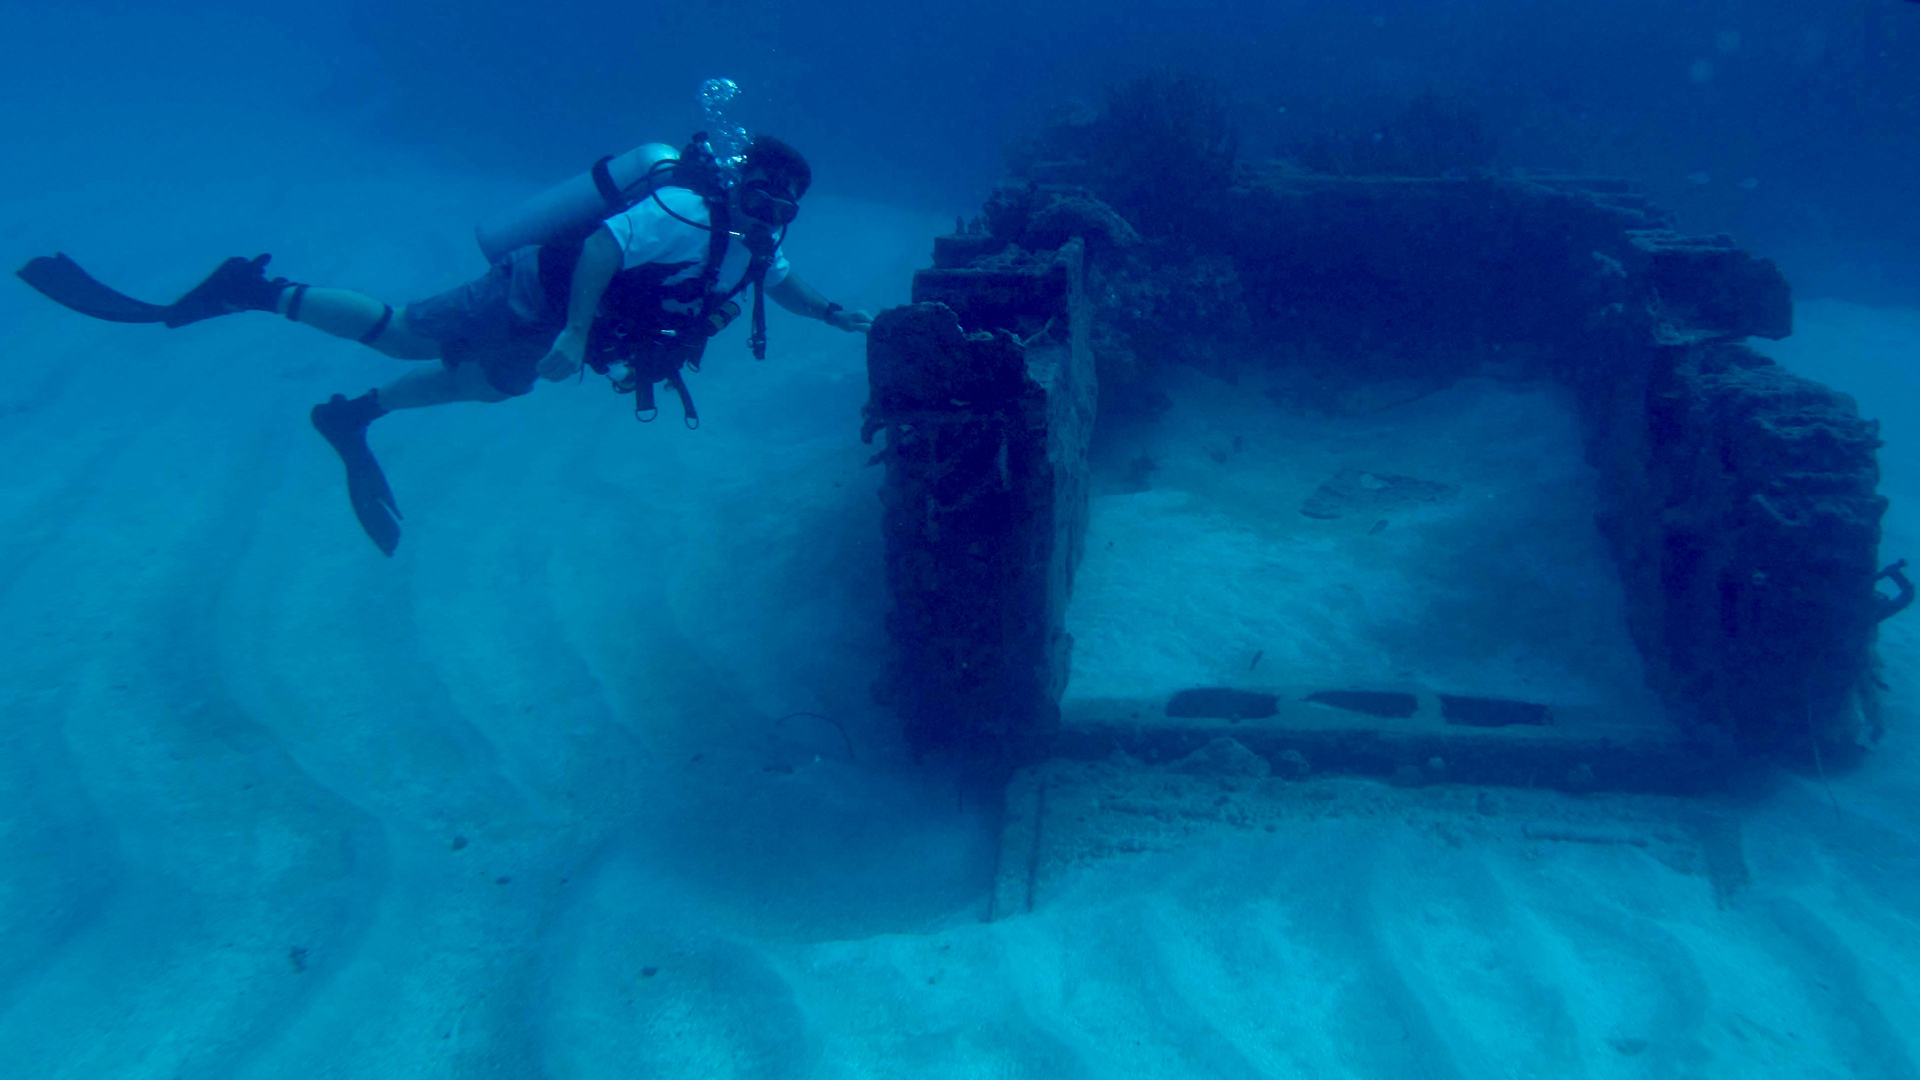 The author undersea with the remains of an amphibious tractor used by American forces during World War II (photograph by Matt Hanks).